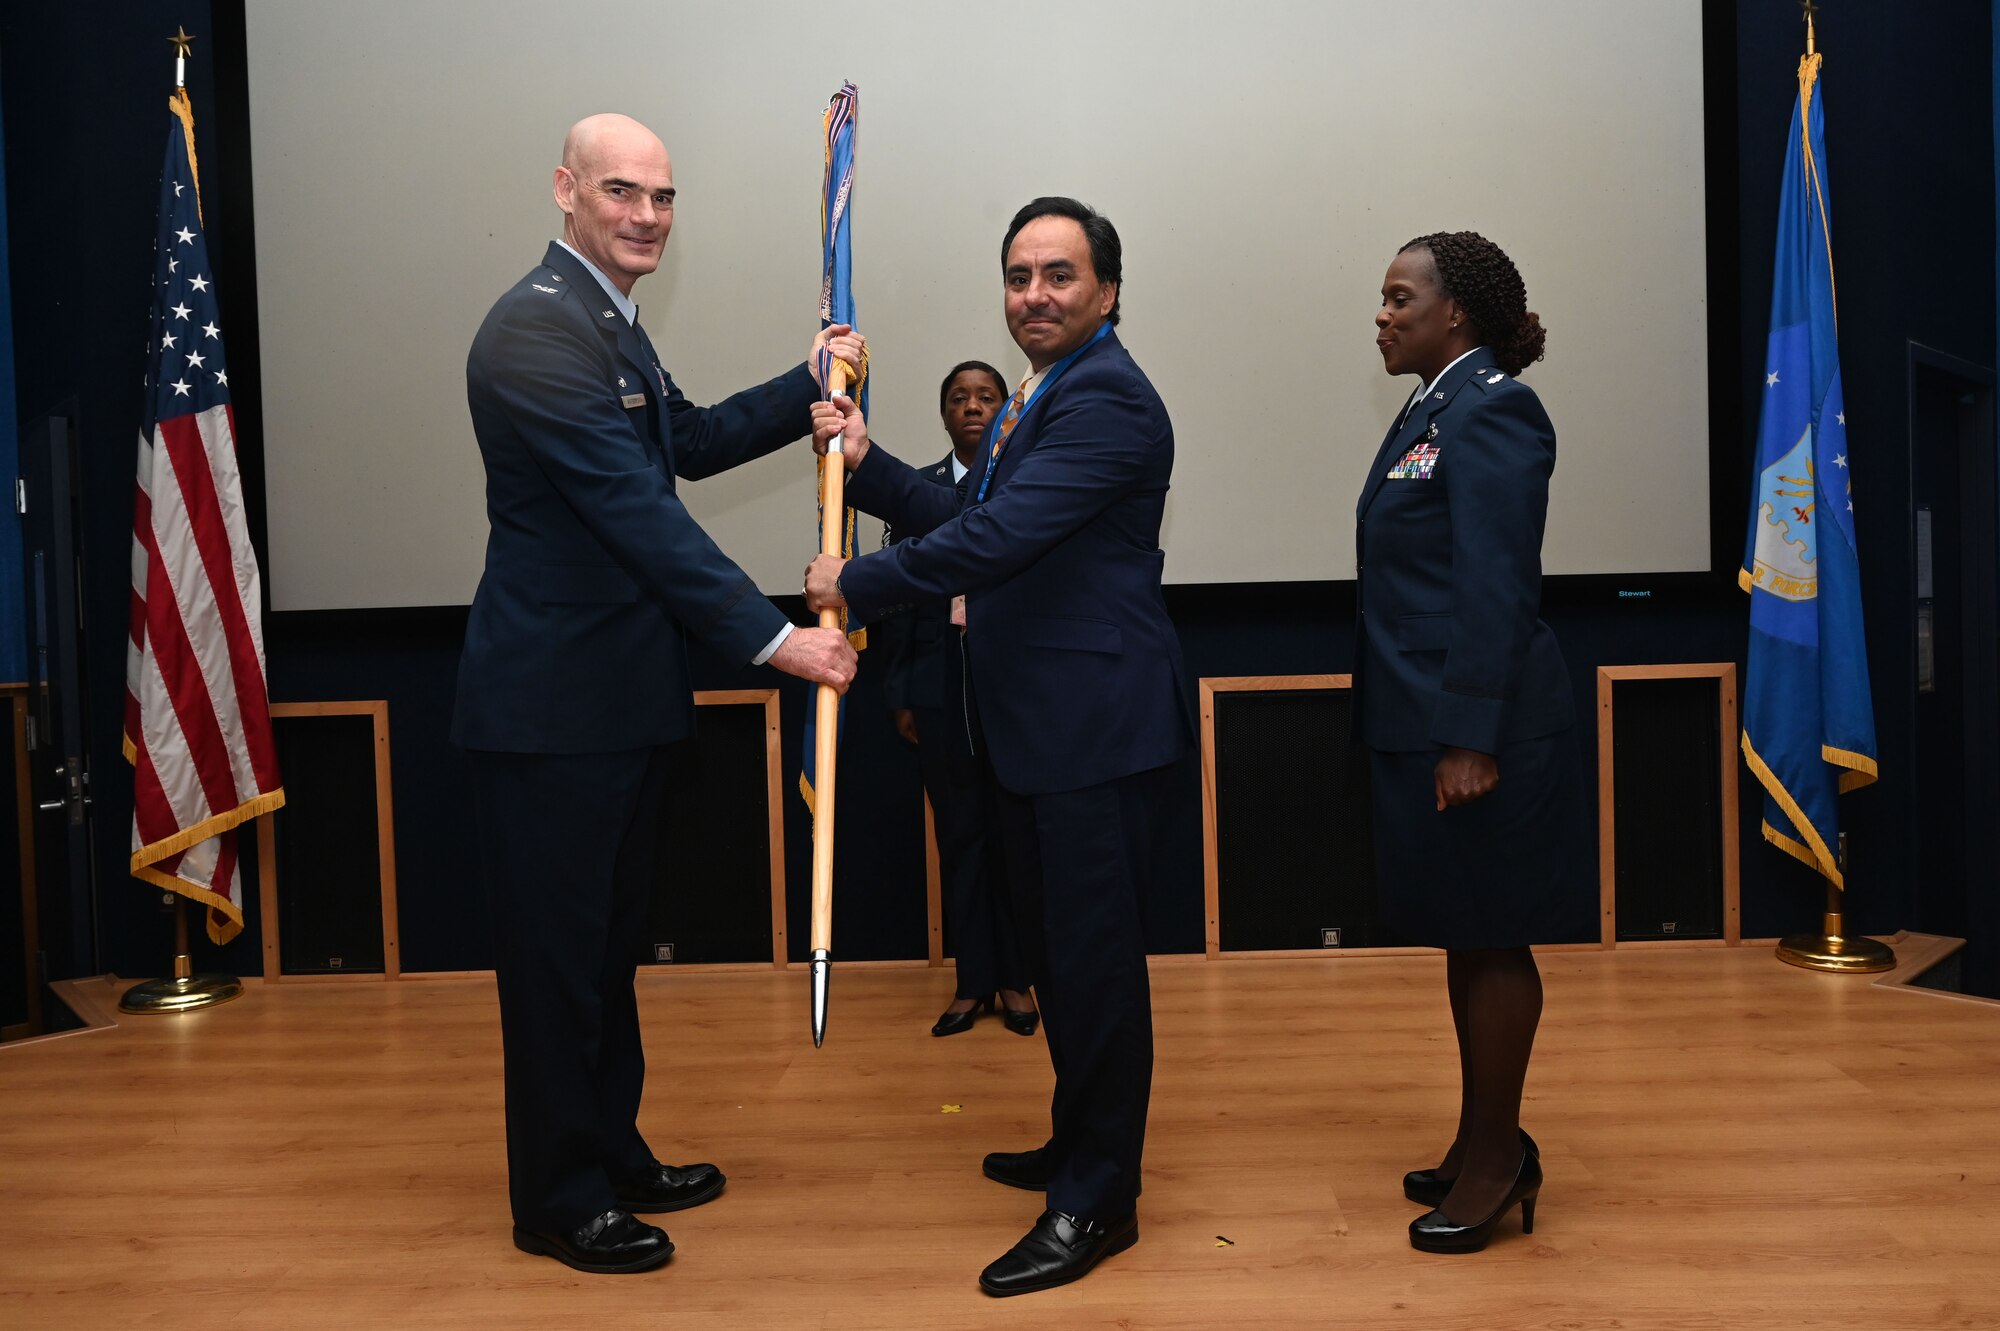 Col. William Gutermuth, 433rd Airlift Wing commander, hands the 433rd AW guidon to Augie Cortez, Jr., owner of Augie’s BBQ, during the Honorary Commanders’ Induction Ceremony on Joint Base San Antonio-Lackland, Texas, Oct. 15, 2023. Honorary commanders have opportunities to learn about their units and commanders through C-5M Super Galaxy tours, demonstrations, events and flights.